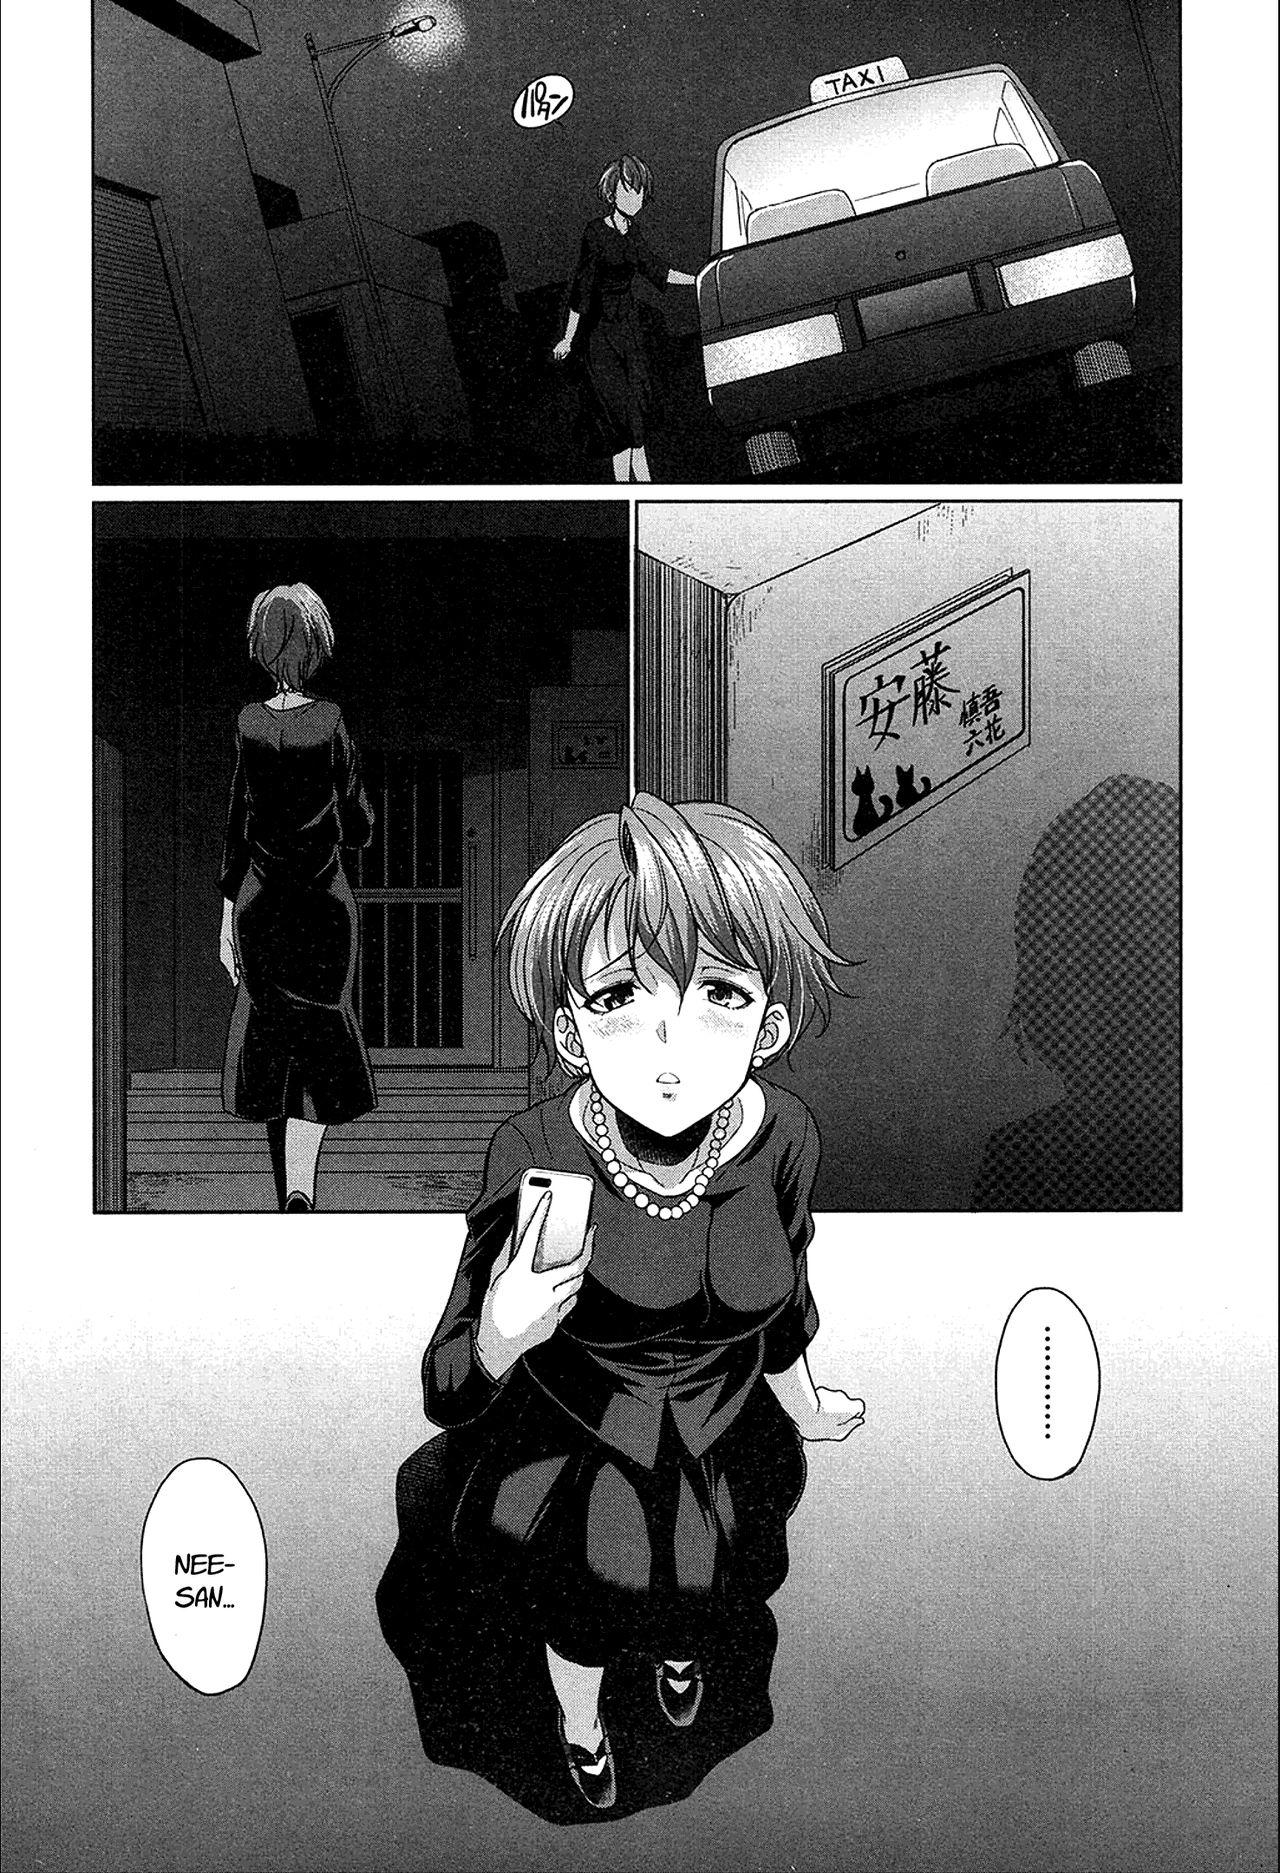 From The Relationship of the Sisters-in-Law [English] [Rewrite] Wives - Page 5